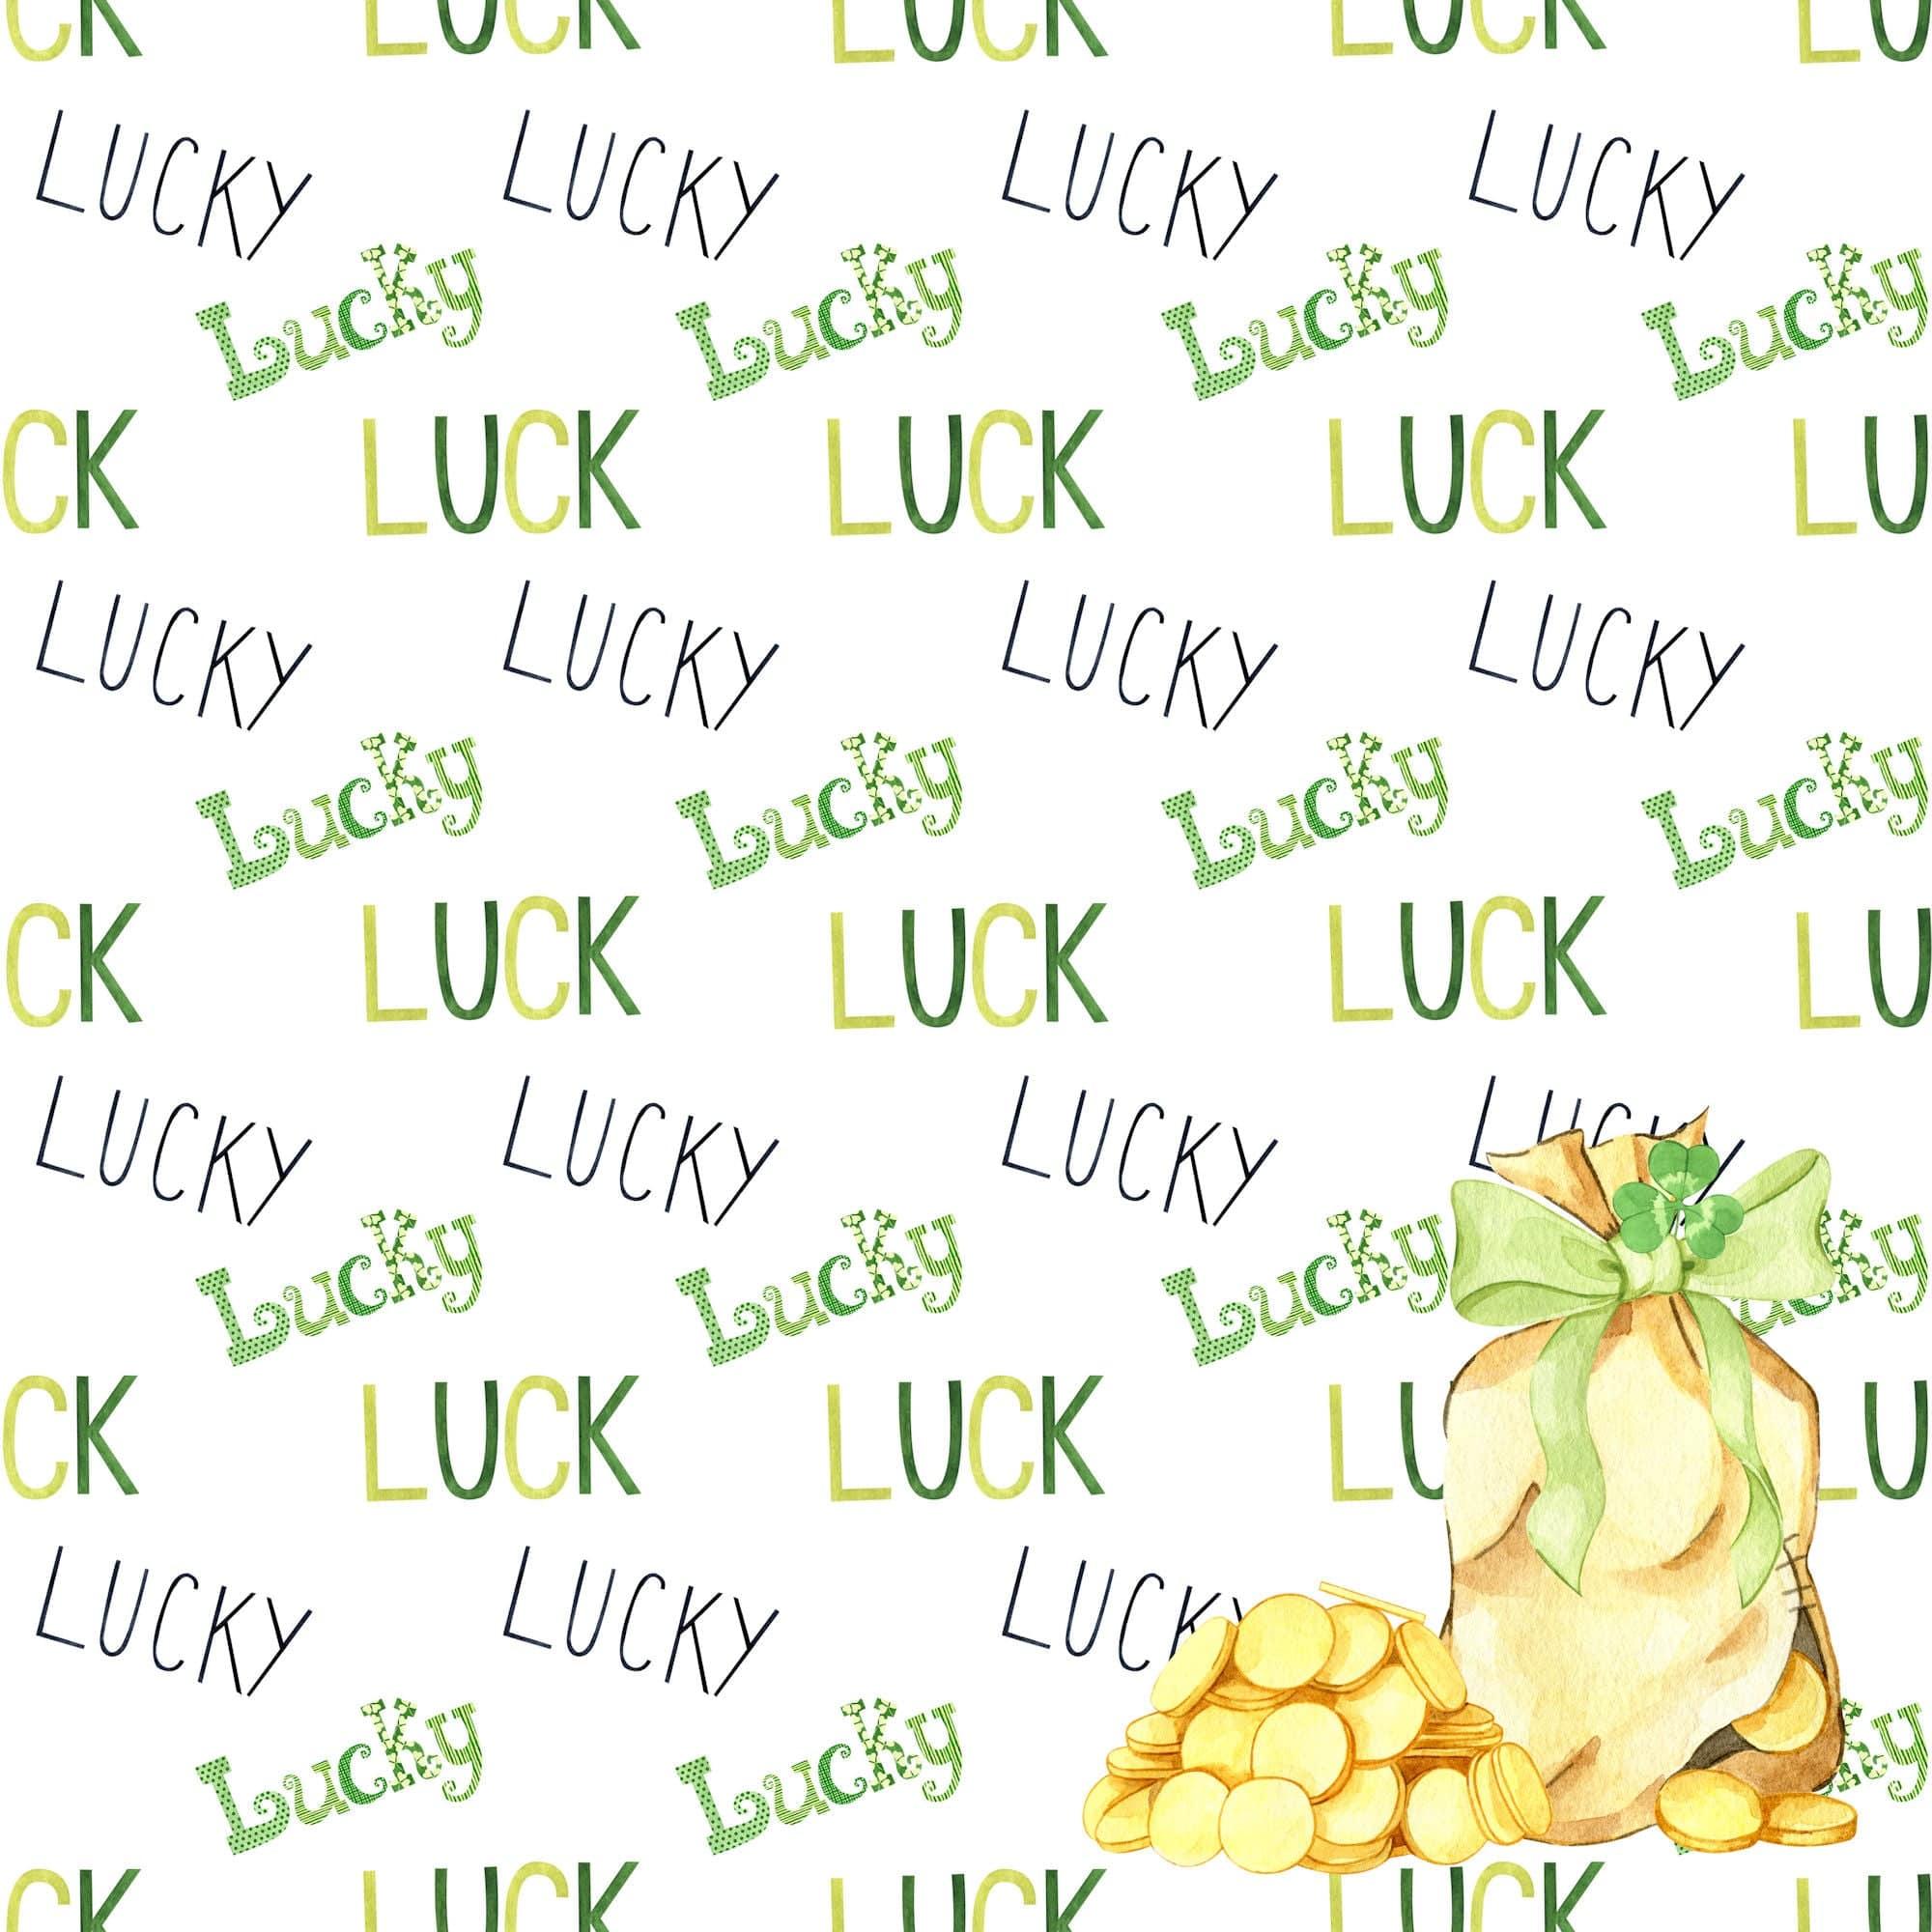 Lucky Leprechauns Collection Gold Treasure 12 x 12 Double-Sided Scrapbook Paper by SSC Designs - Scrapbook Supply Companies